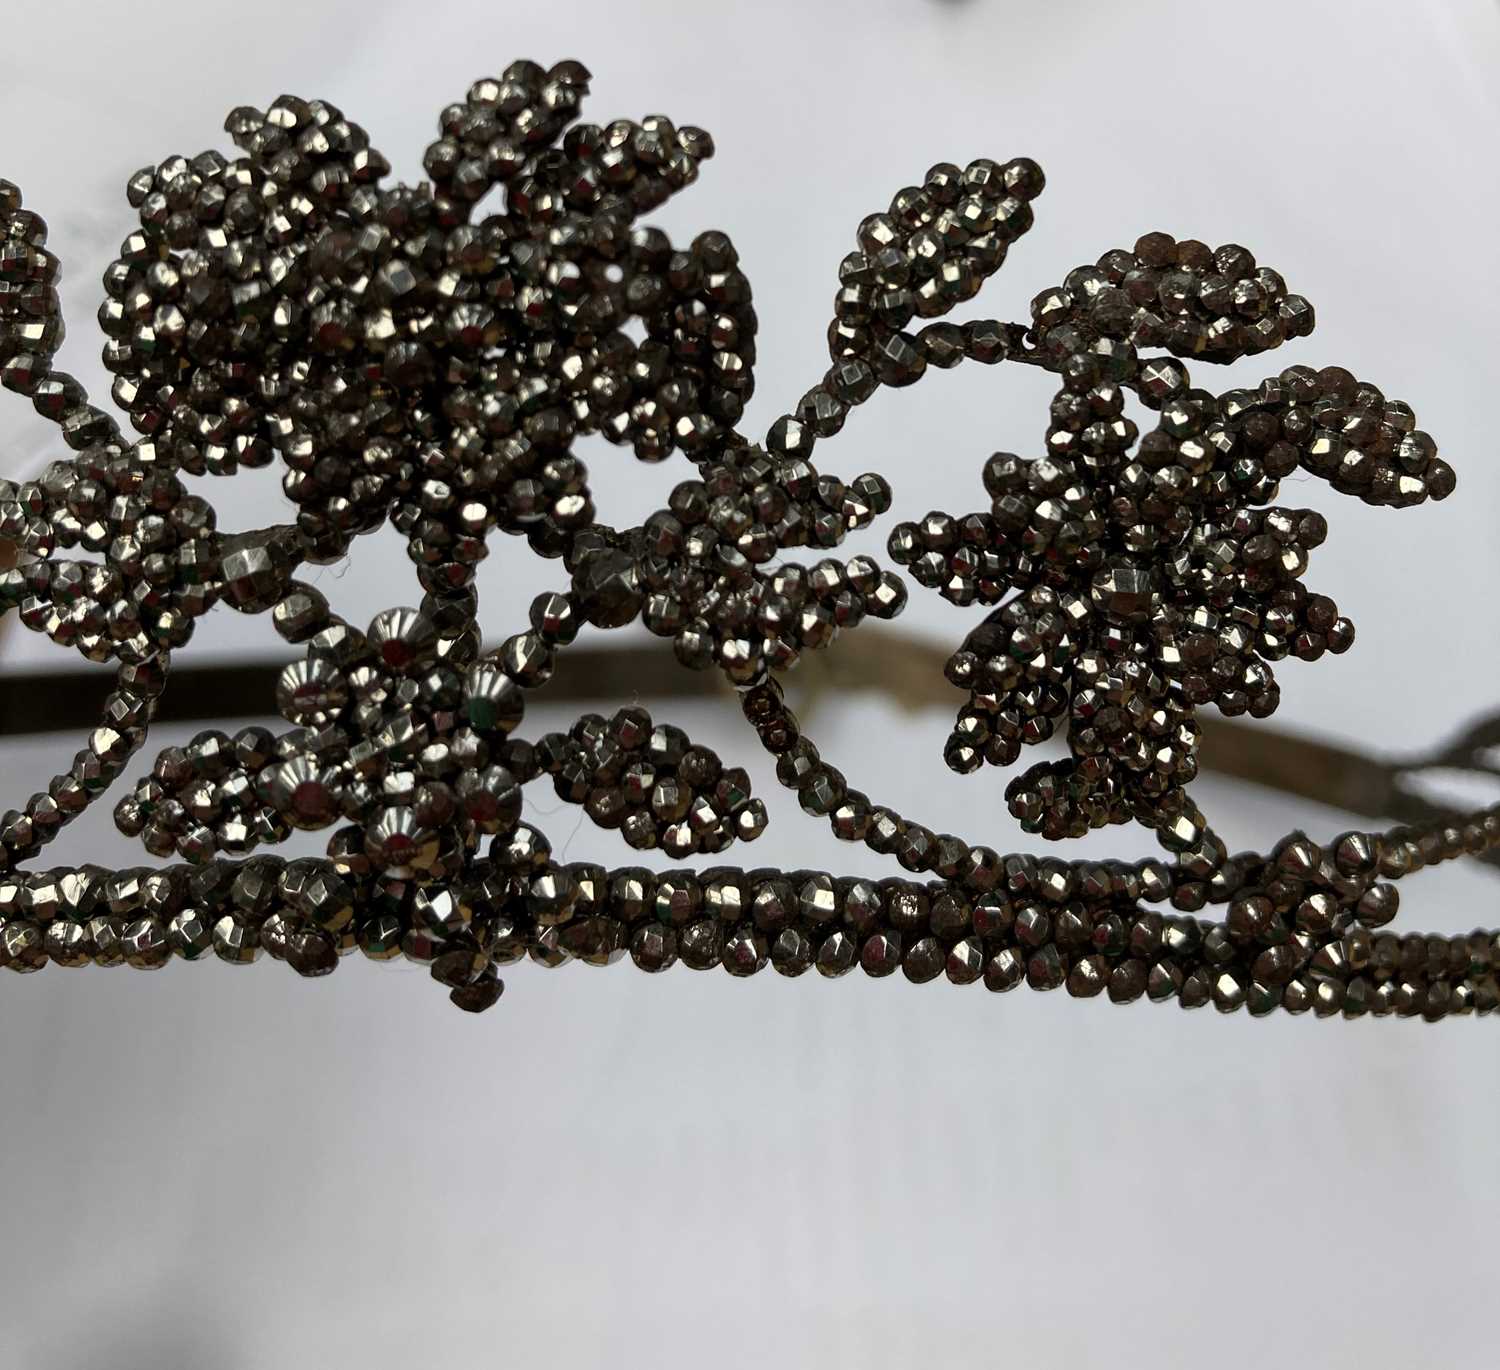 19th Century and Later Cut Steel Jewellery, comprising a decorative tiara with rotating flower heads - Image 19 of 19